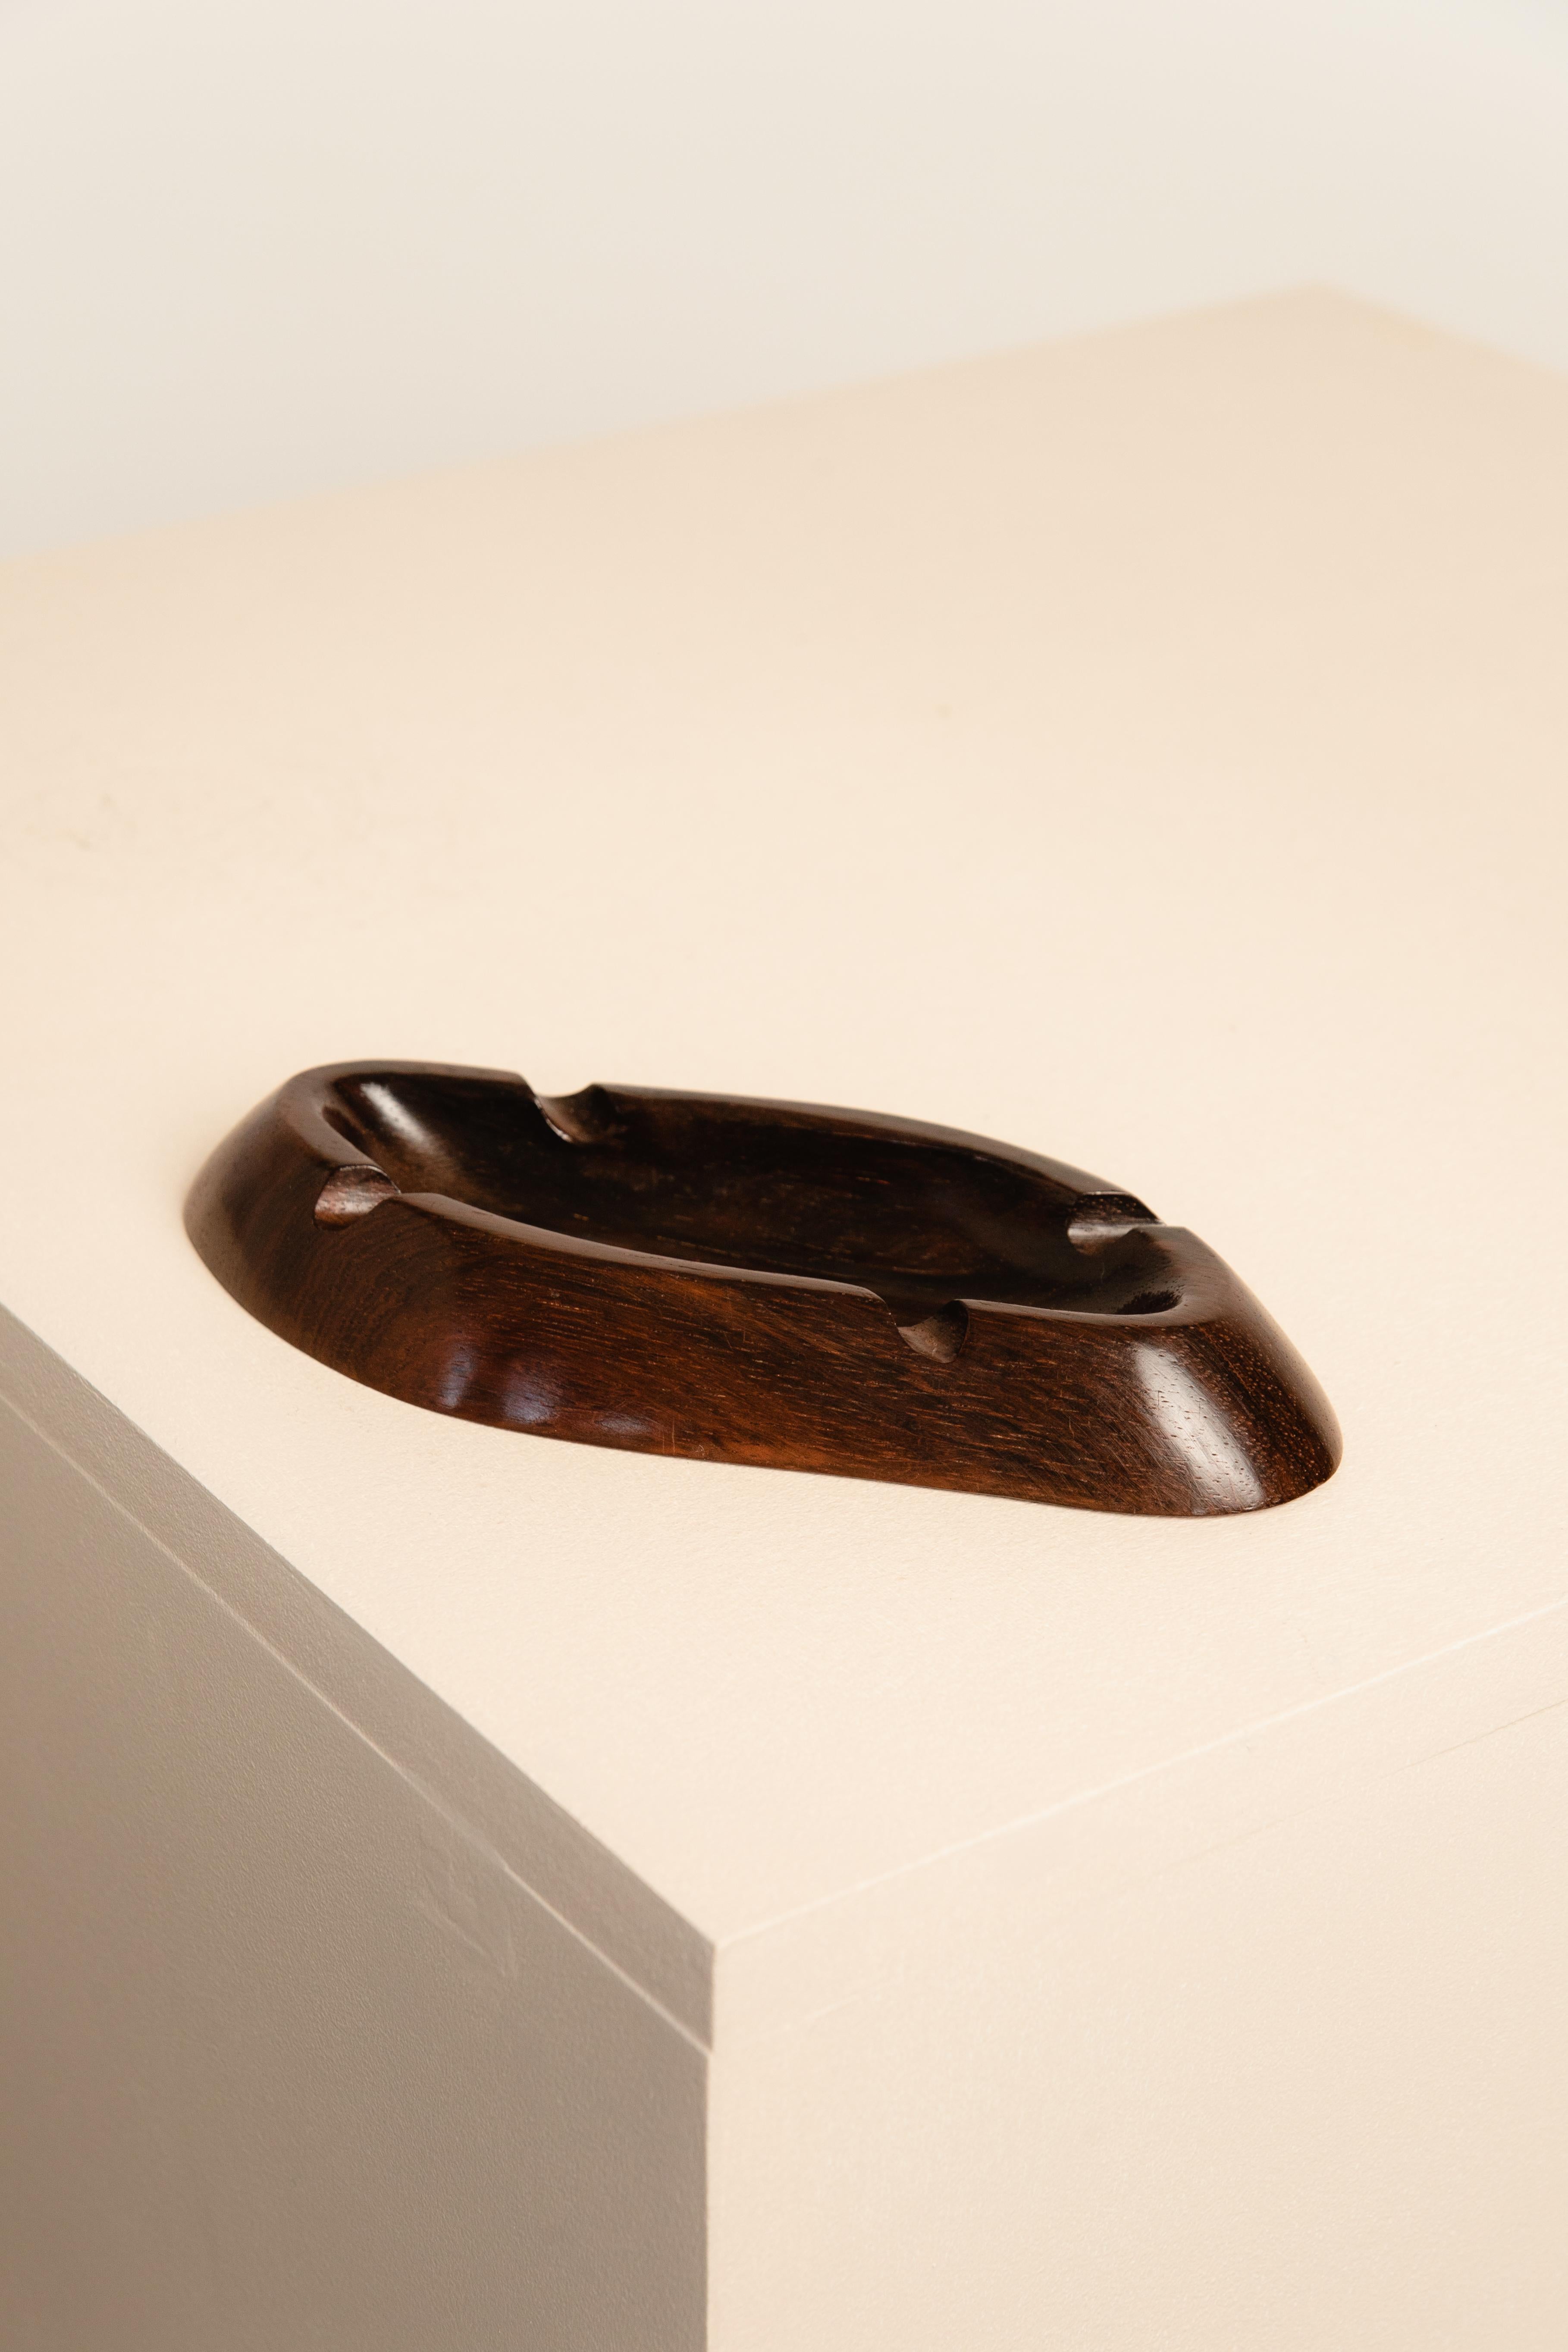 Brazilian Midcentury Ashtray in Solid Rosewood by Jac-Art, 1970s In Good Condition For Sale In Rio De Janeiro, RJ